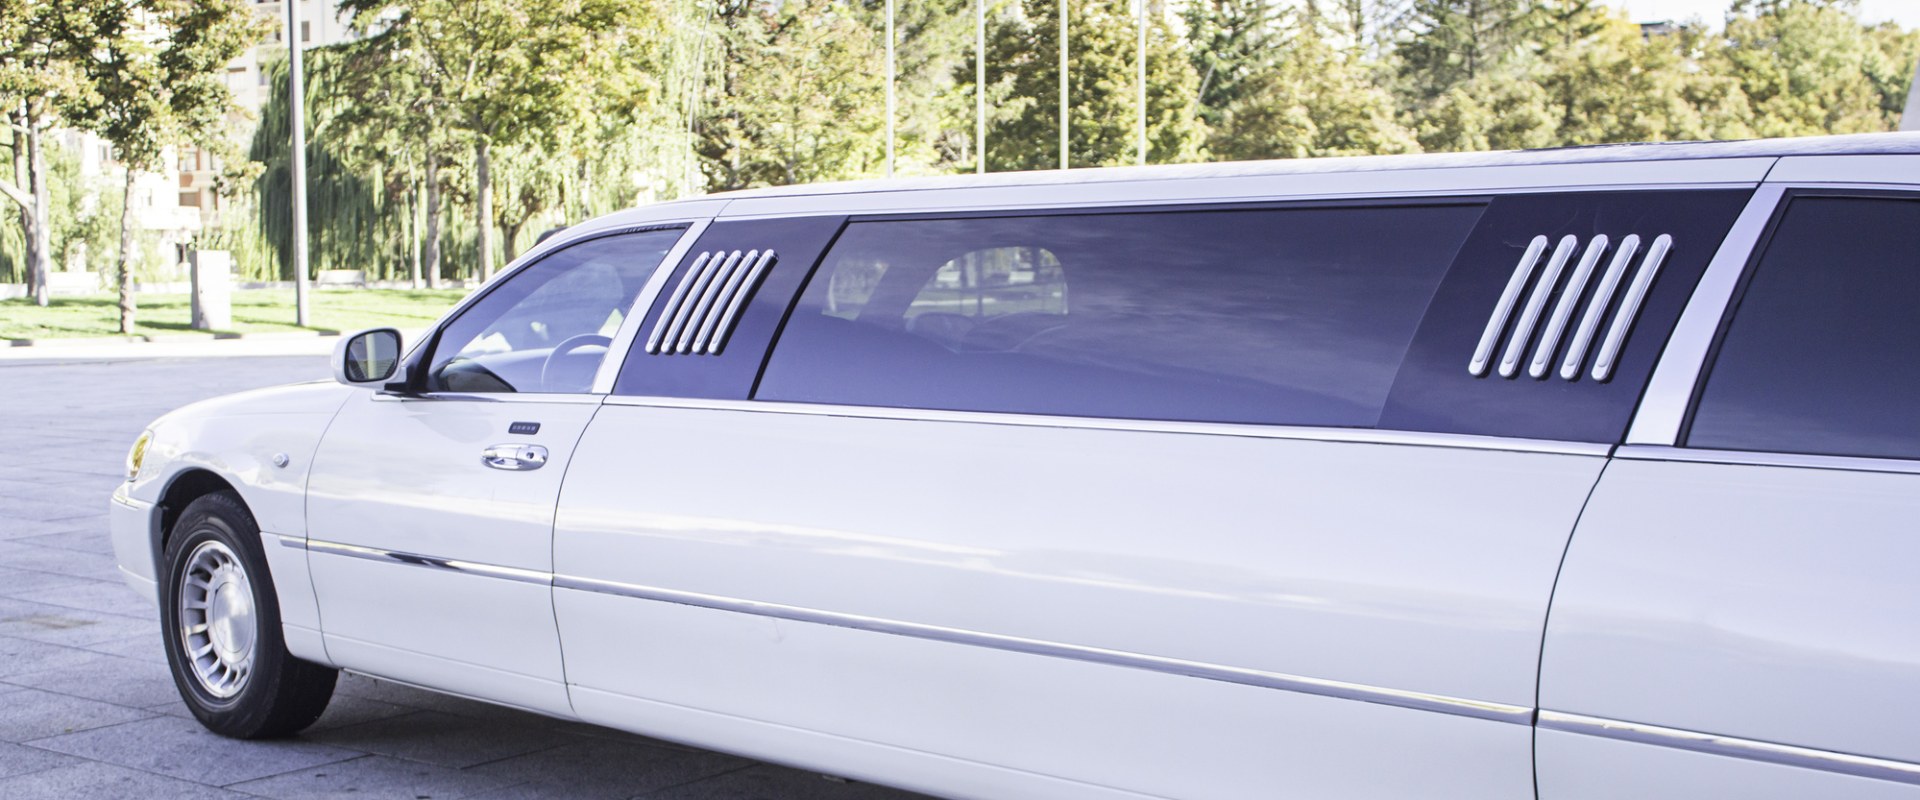 Limousine Service Requirements in Tarrant County: What You Need to Know